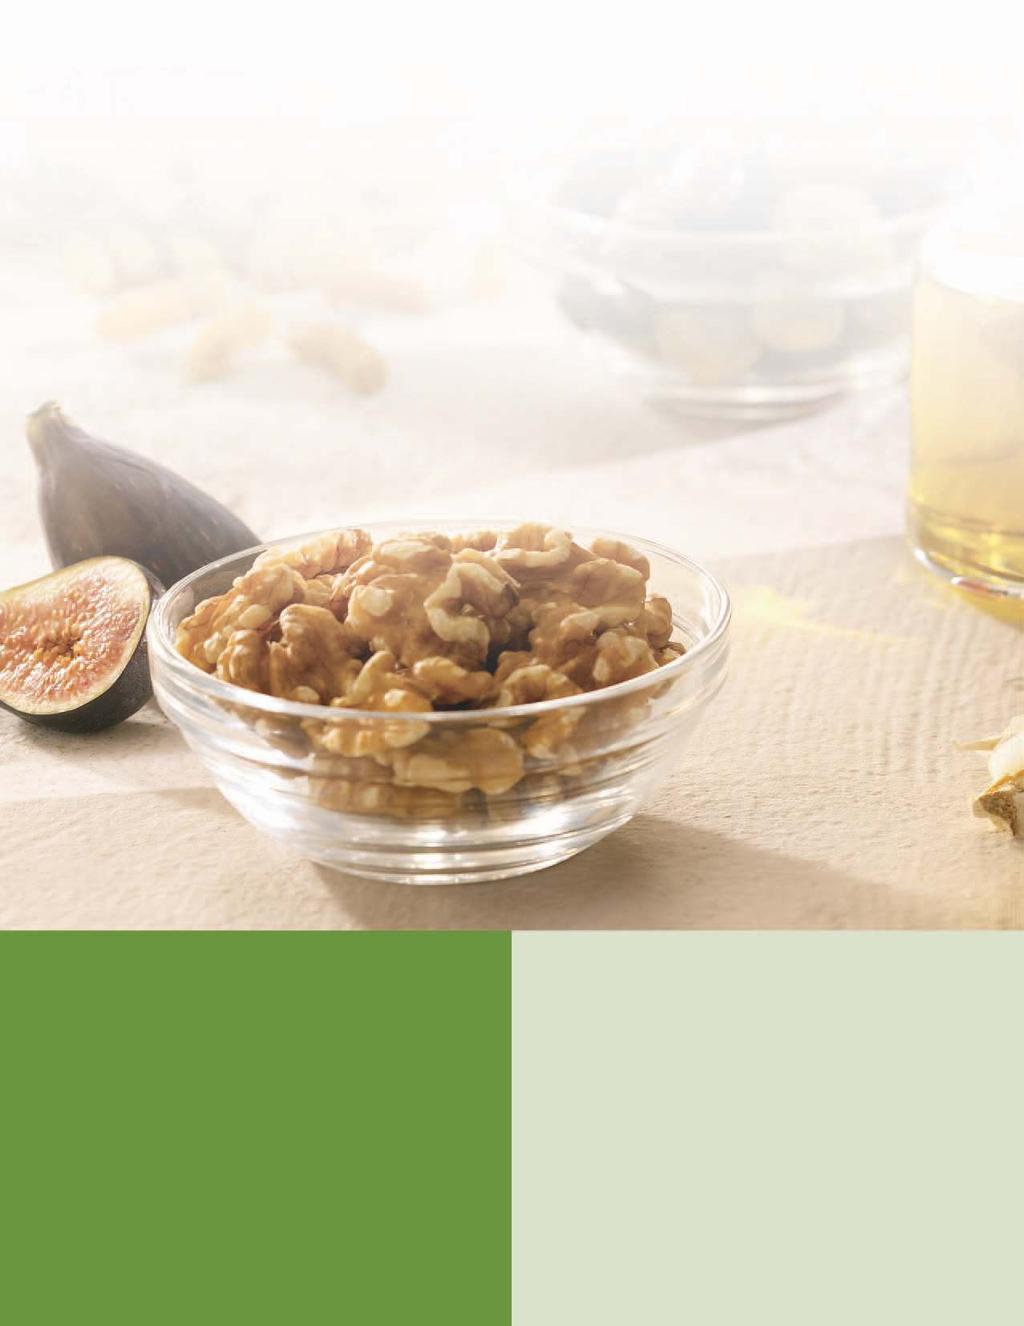 Formulations CALIFORNIA 2011 WALNUT California walnuts are a versatile ingredient that will add value and crunch to your products. Browse new 2011 formulations developed to inspire food professionals.